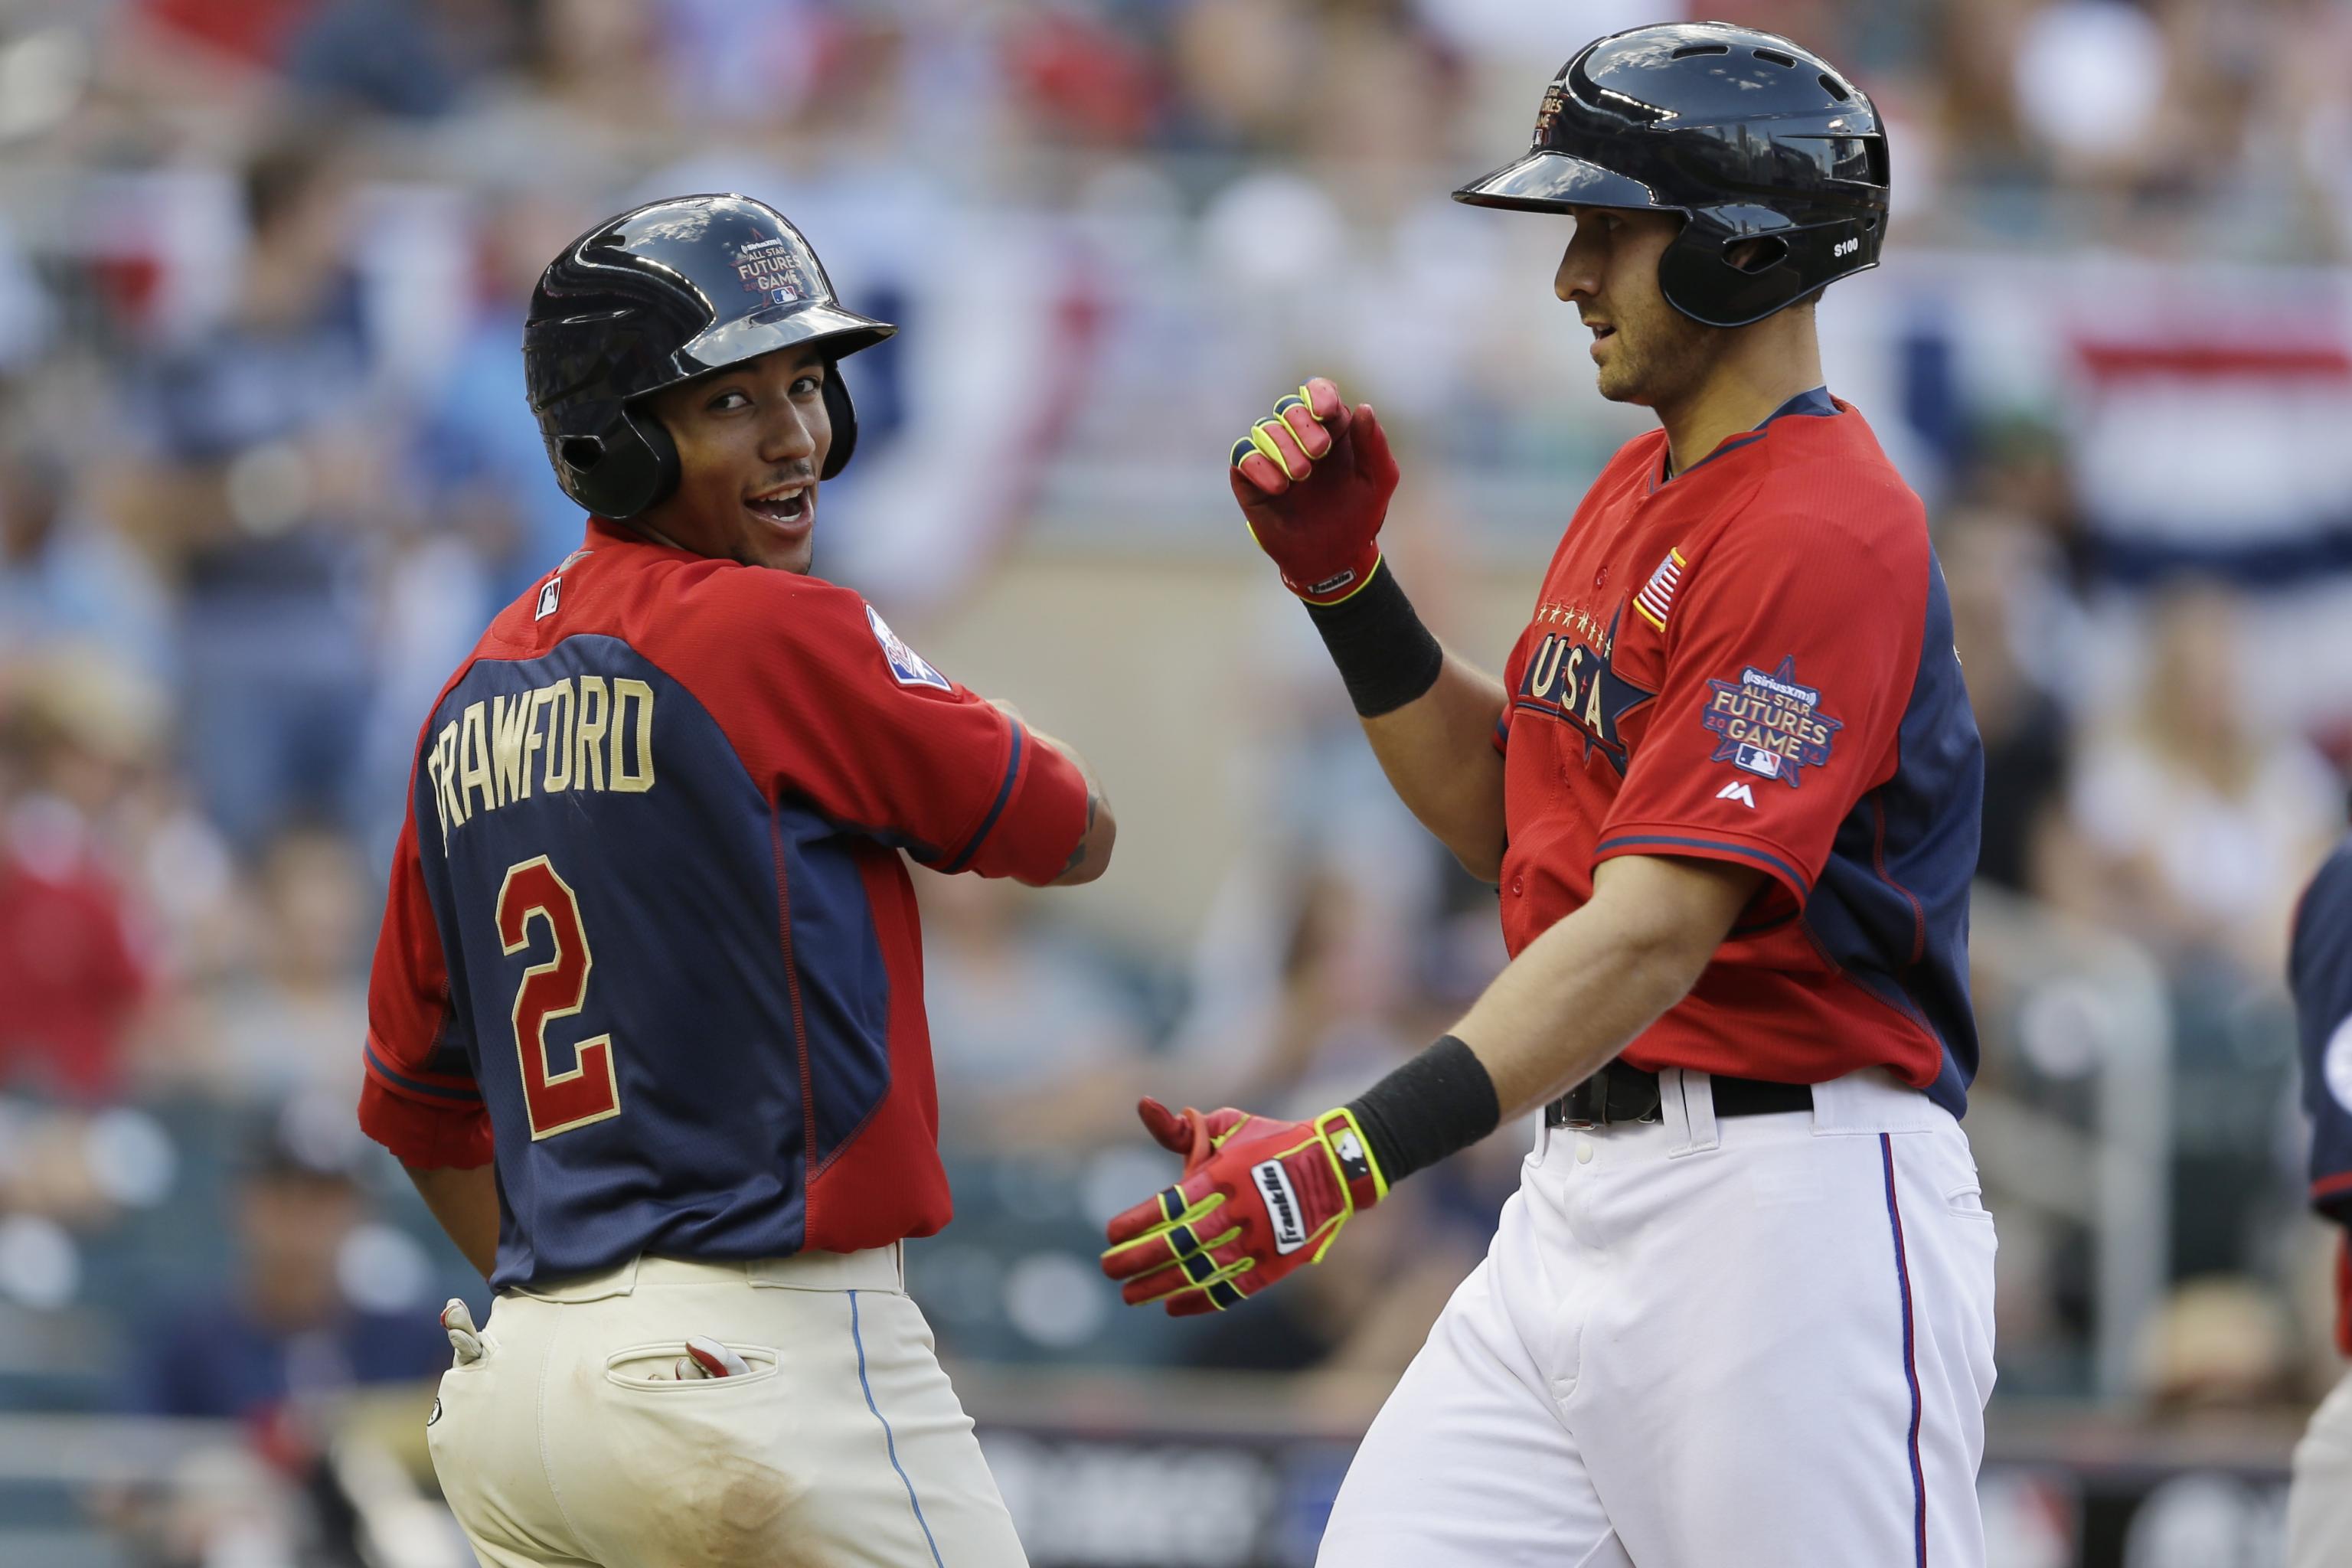 MLB Futures Game 2014: Results, Box Score, Top Performers from